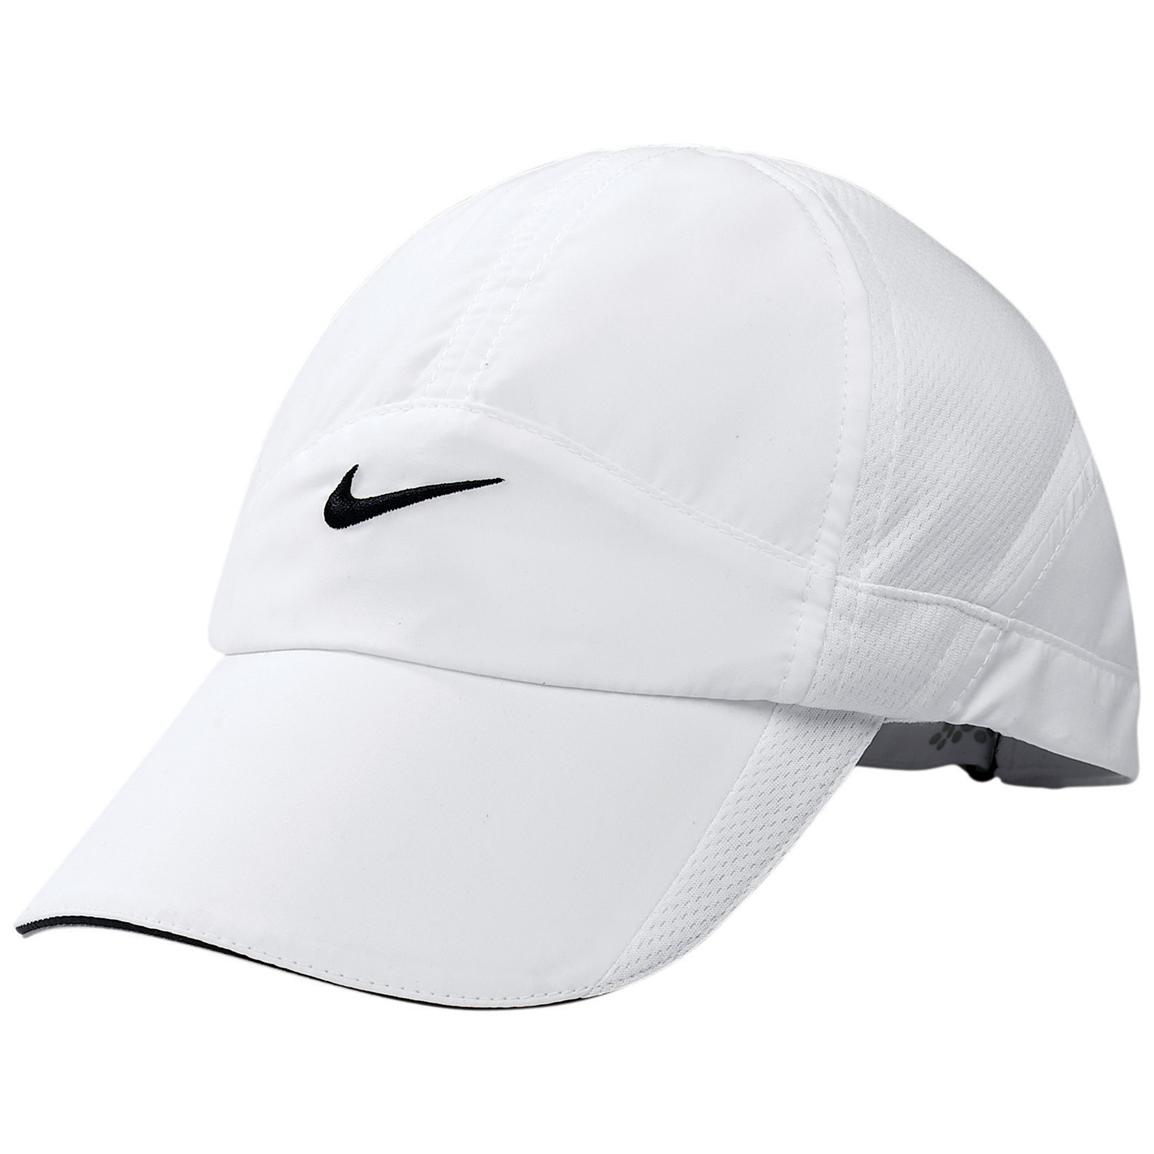 Women's Nike® Feather Light Cap - 143810, at Sportsman's Guide